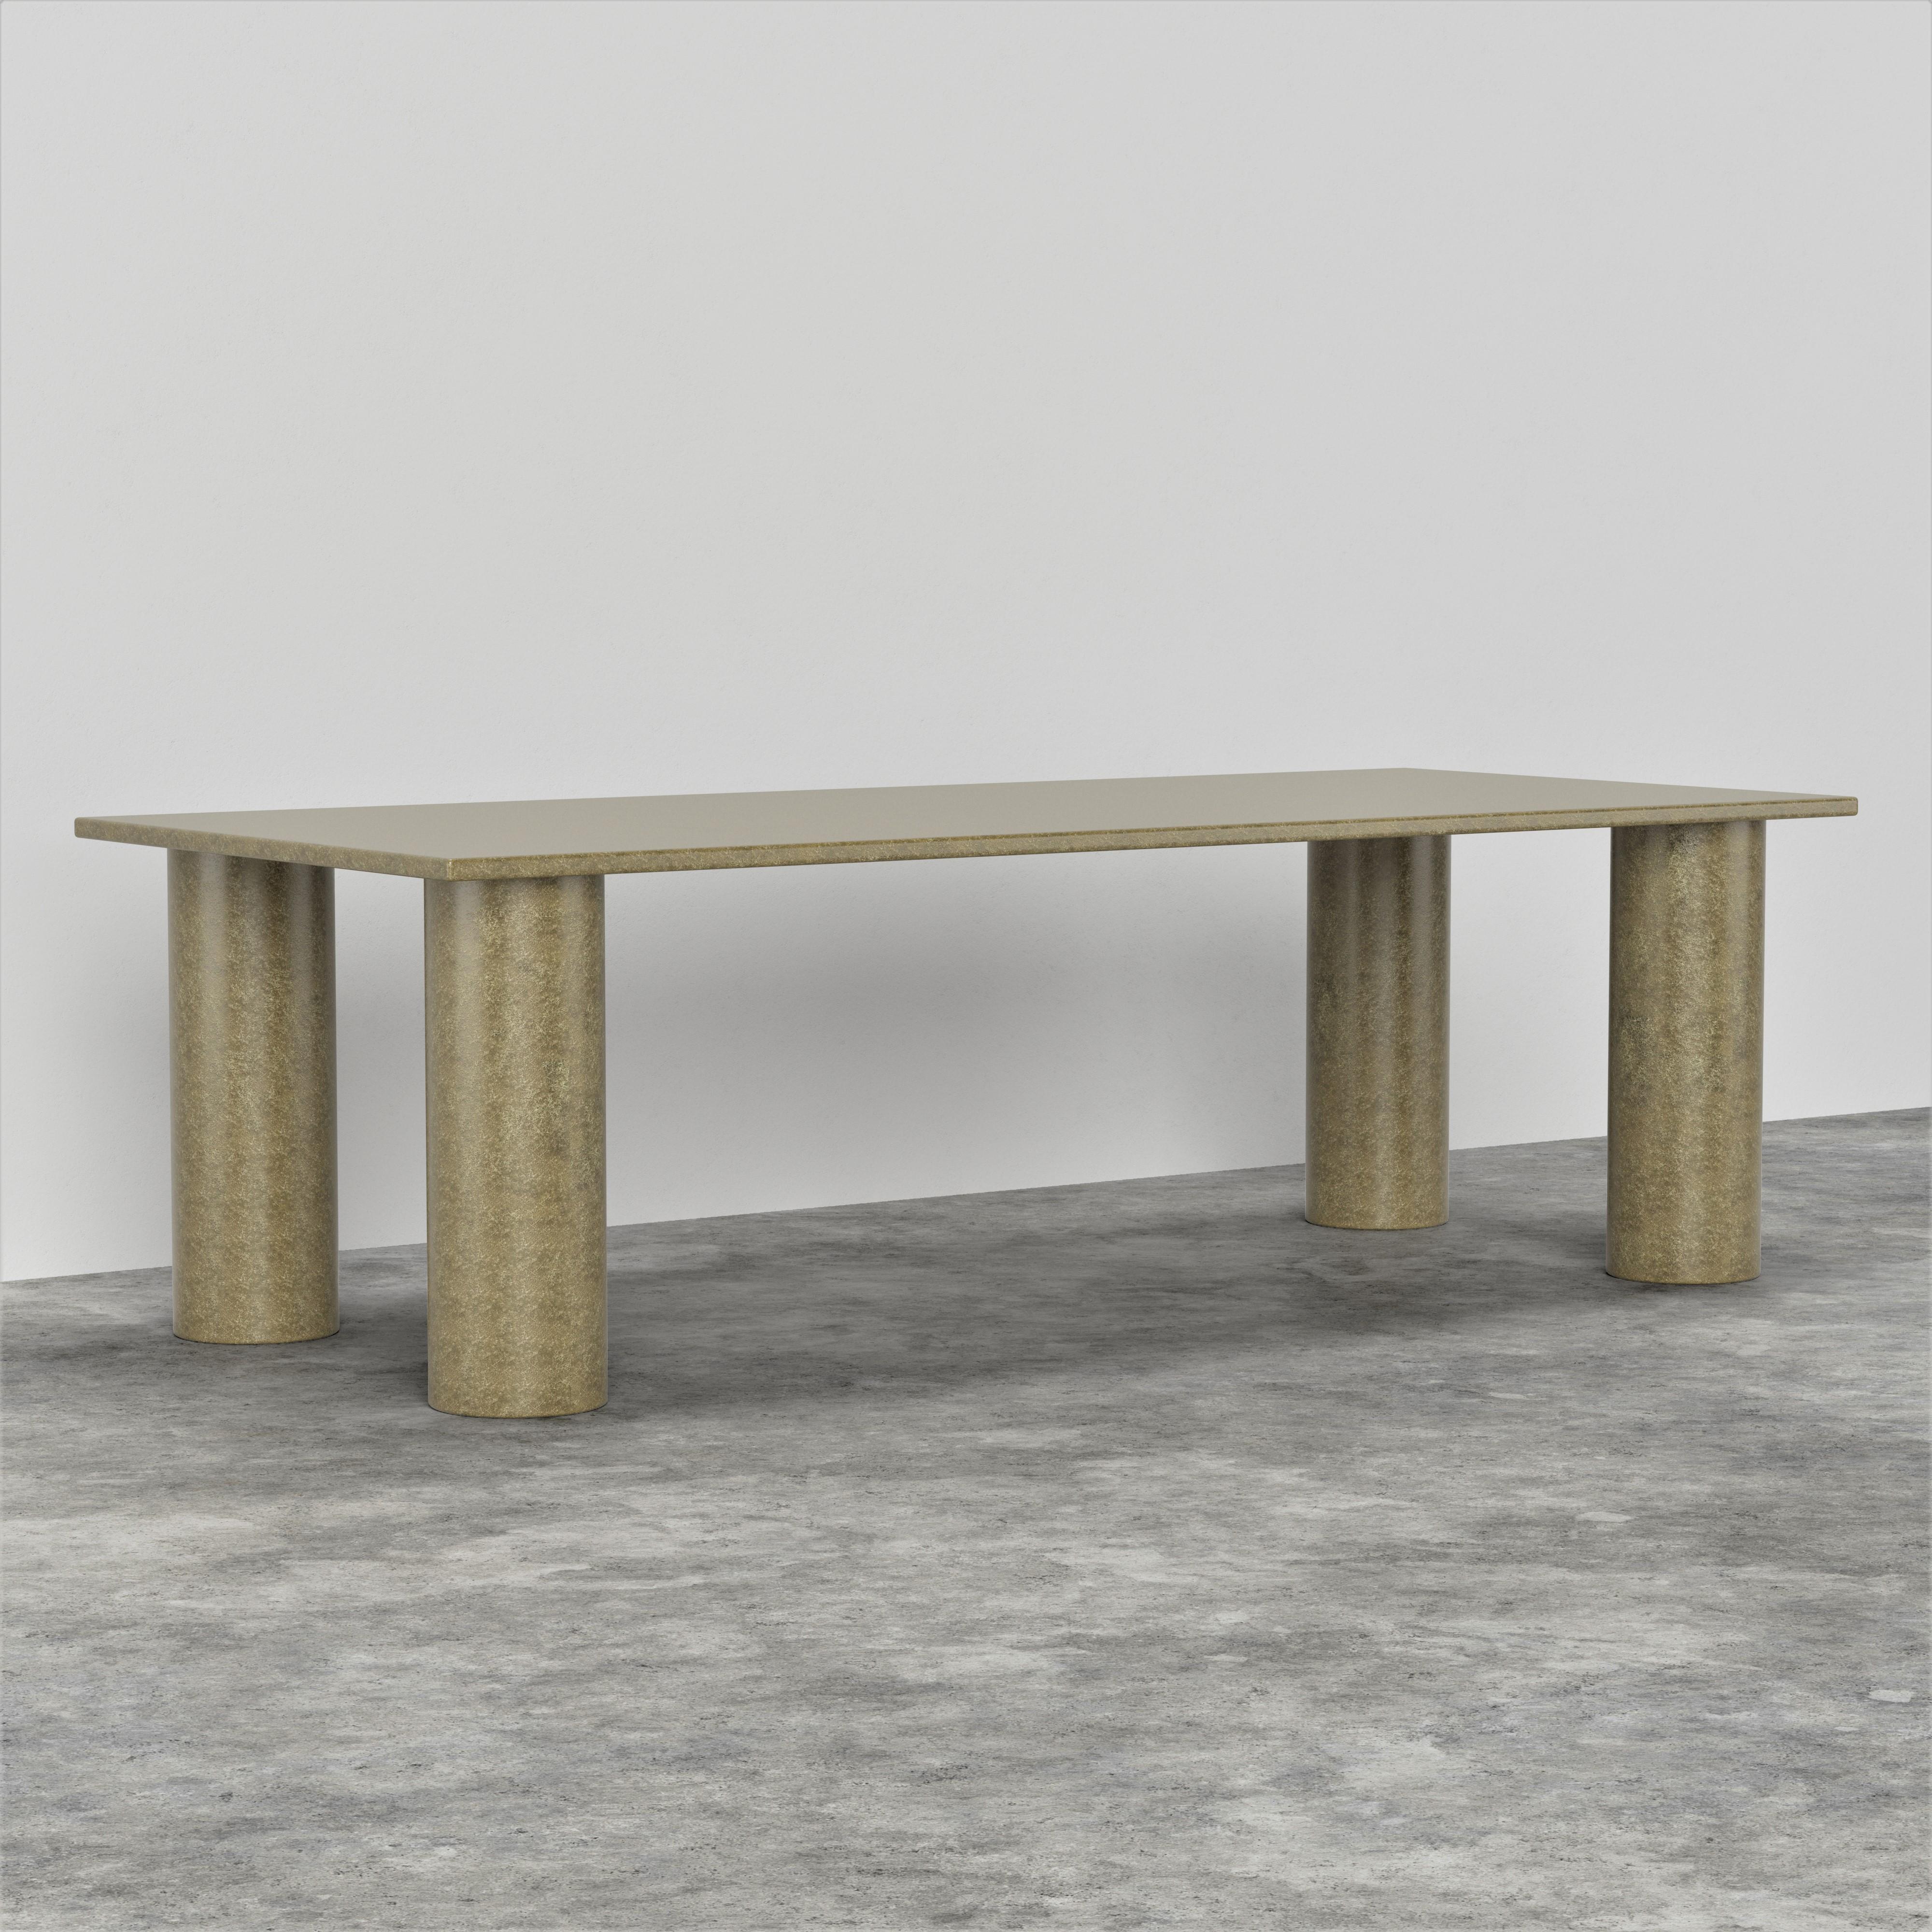 The table is manufactured of continuous and aligned glass fiber-reinforced resin composite, a highly resistant and durable material. 
Meticulously handmade by skilled artisans one piece at a time.
The table emphasize the beauty of brutalism with